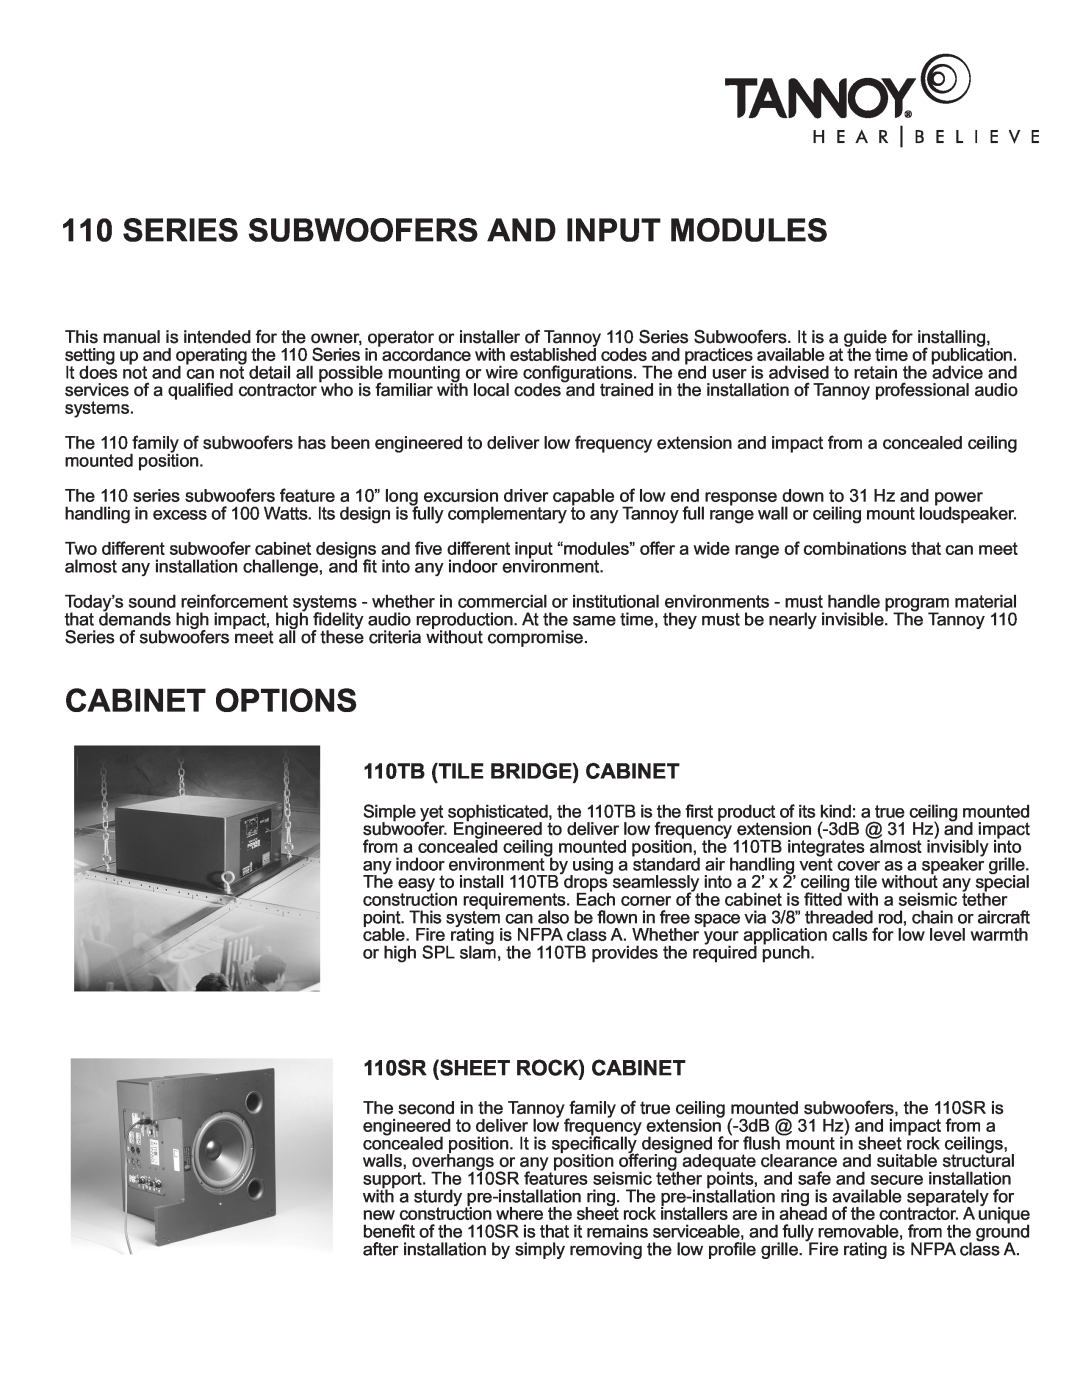 TOA Electronics 110SR owner manual Series Subwoofers And Input Modules, Cabinet Options, 110TB TILE BRIDGE CABINET 